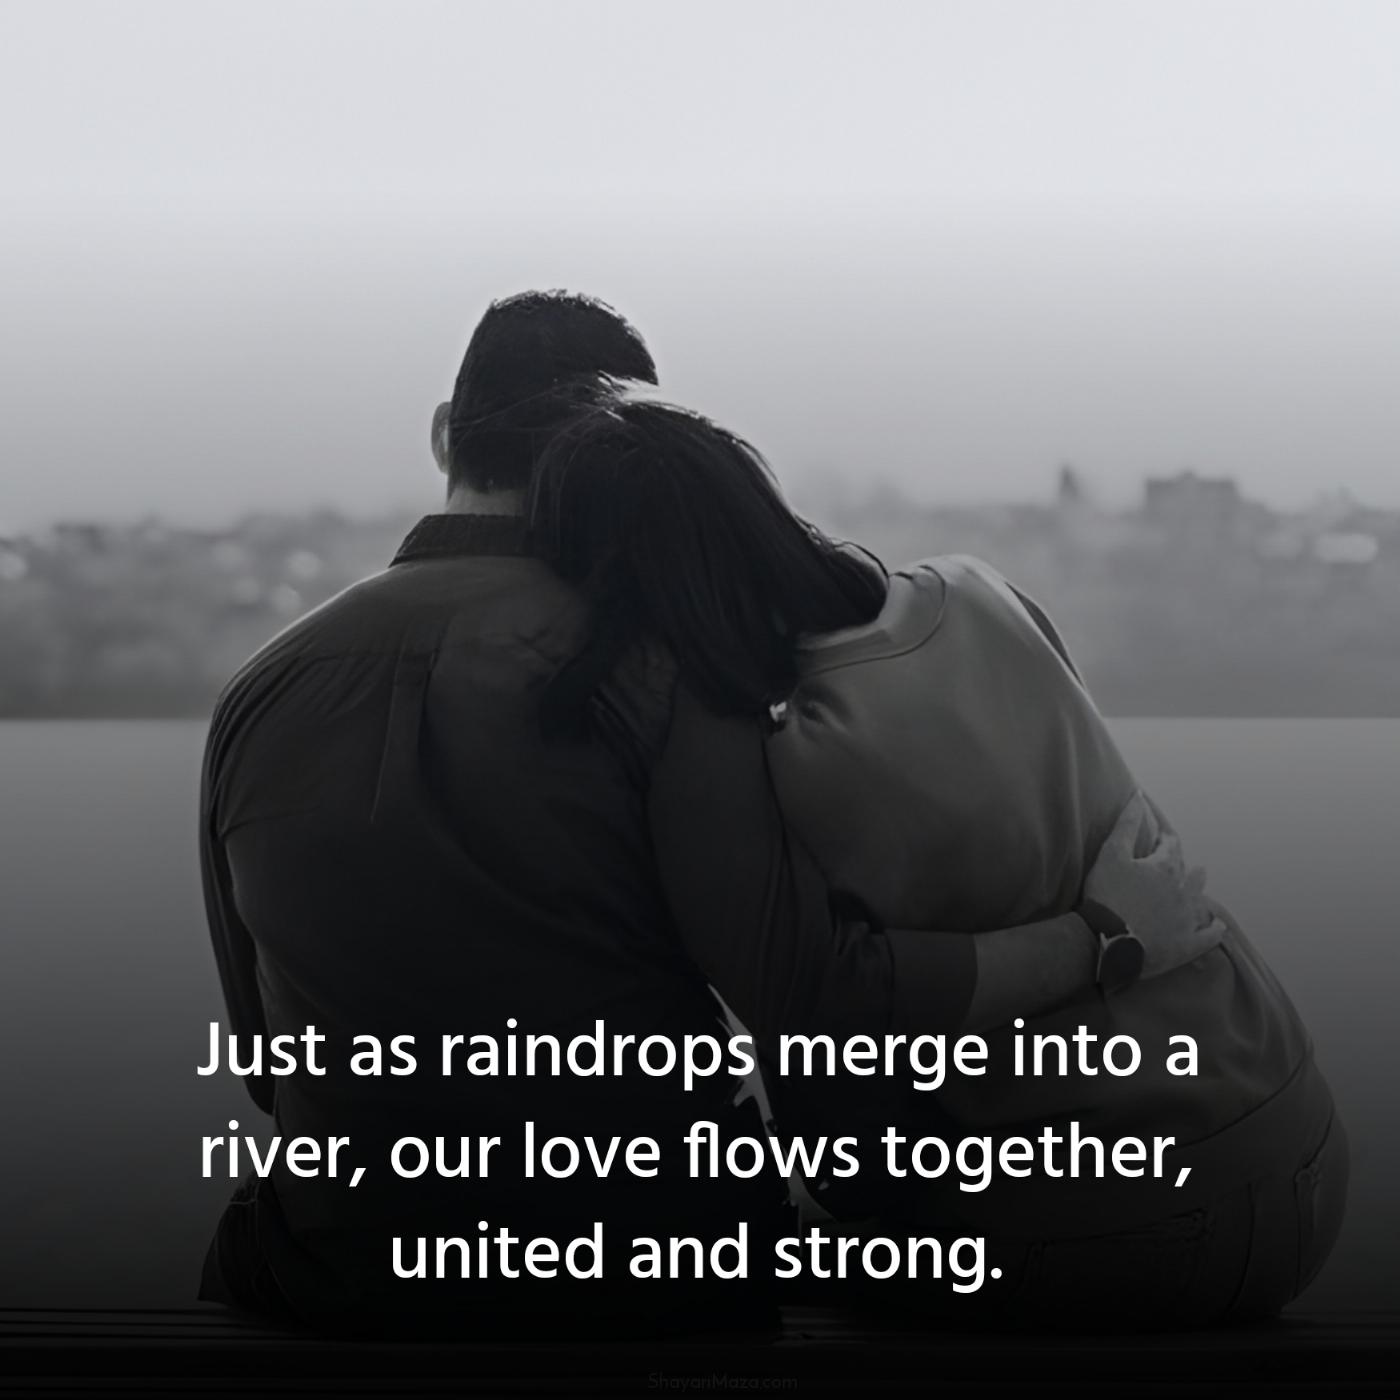 Just as raindrops merge into a river our love flows together